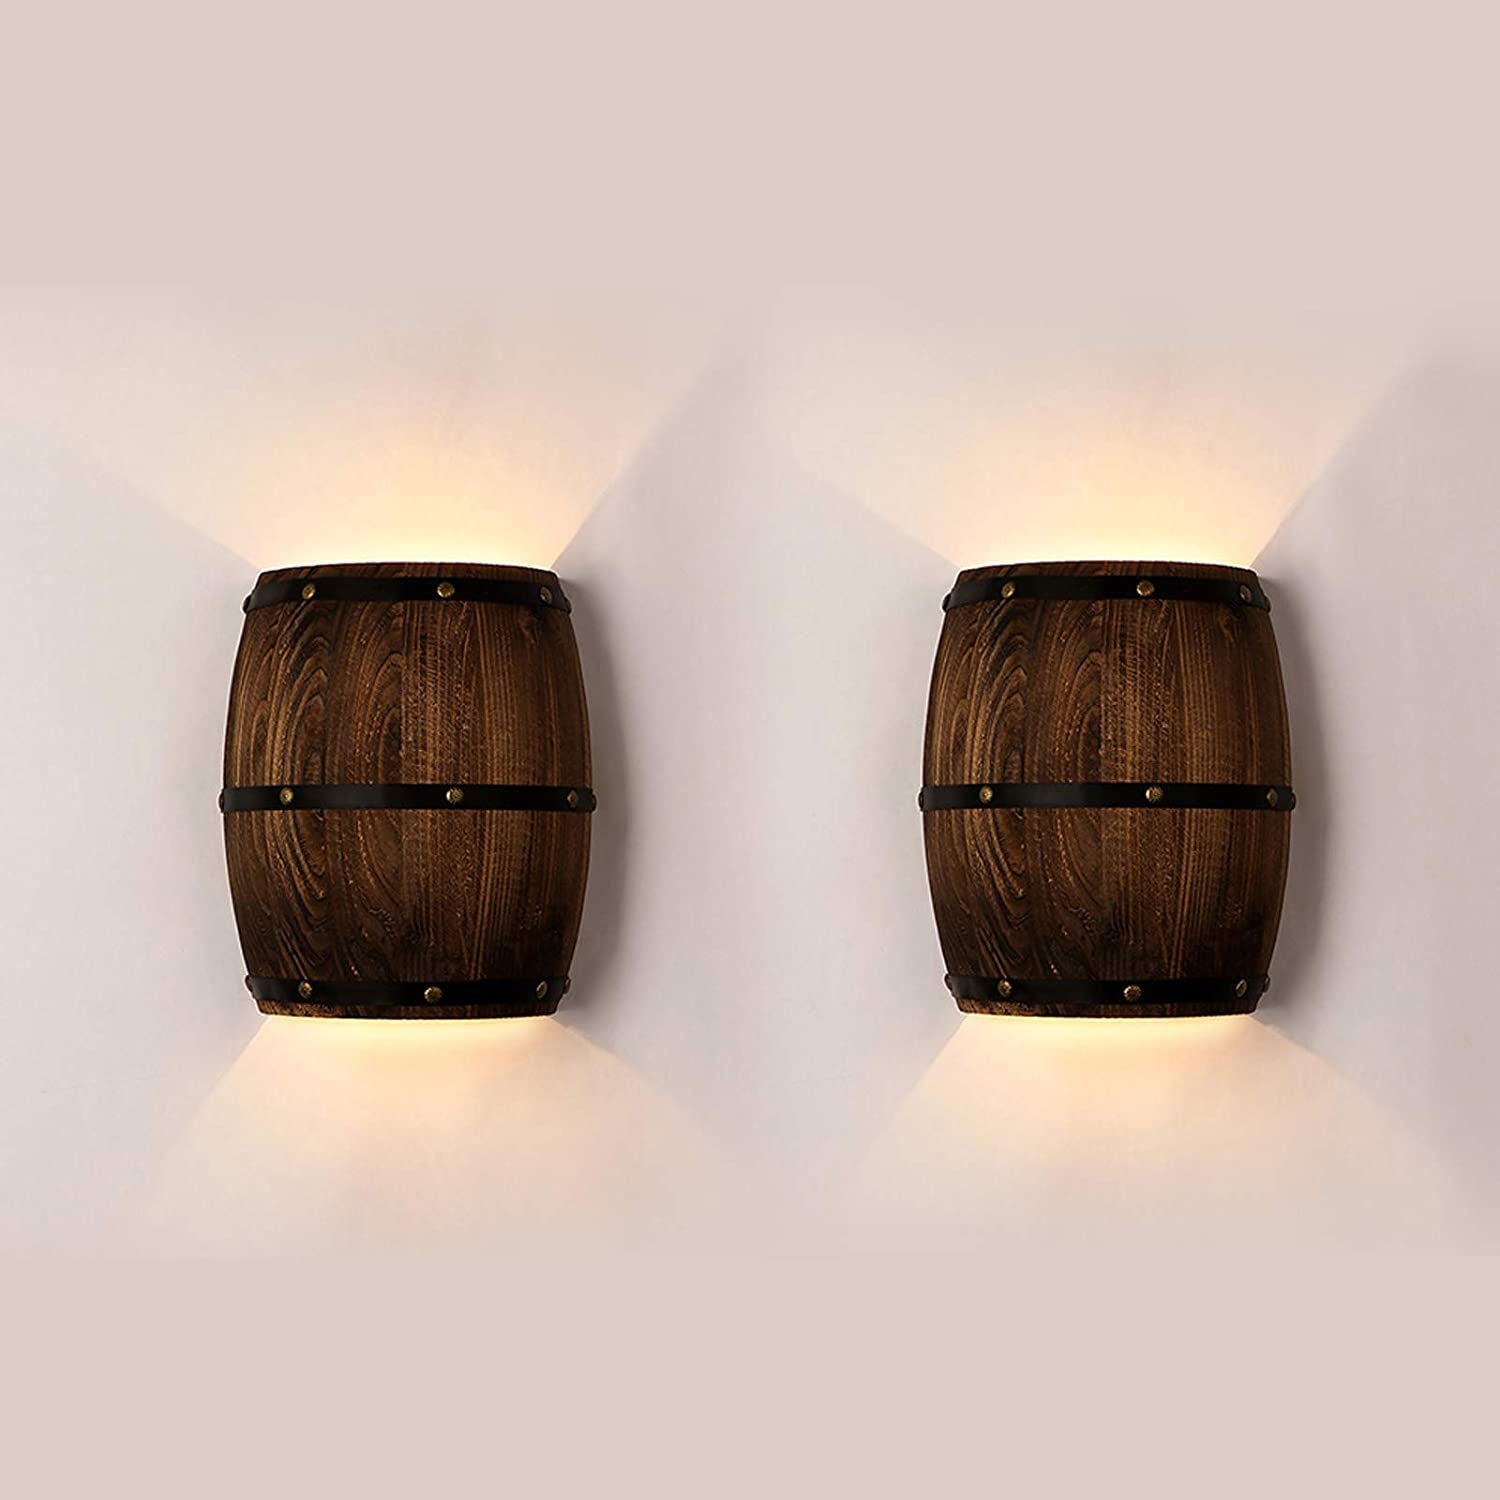 Antique 2 Pack Wood Wine Barrel Wall Sconce Lighting Fixture up and down Indoor Wall Lamps for Bar Area Steampunk Theme